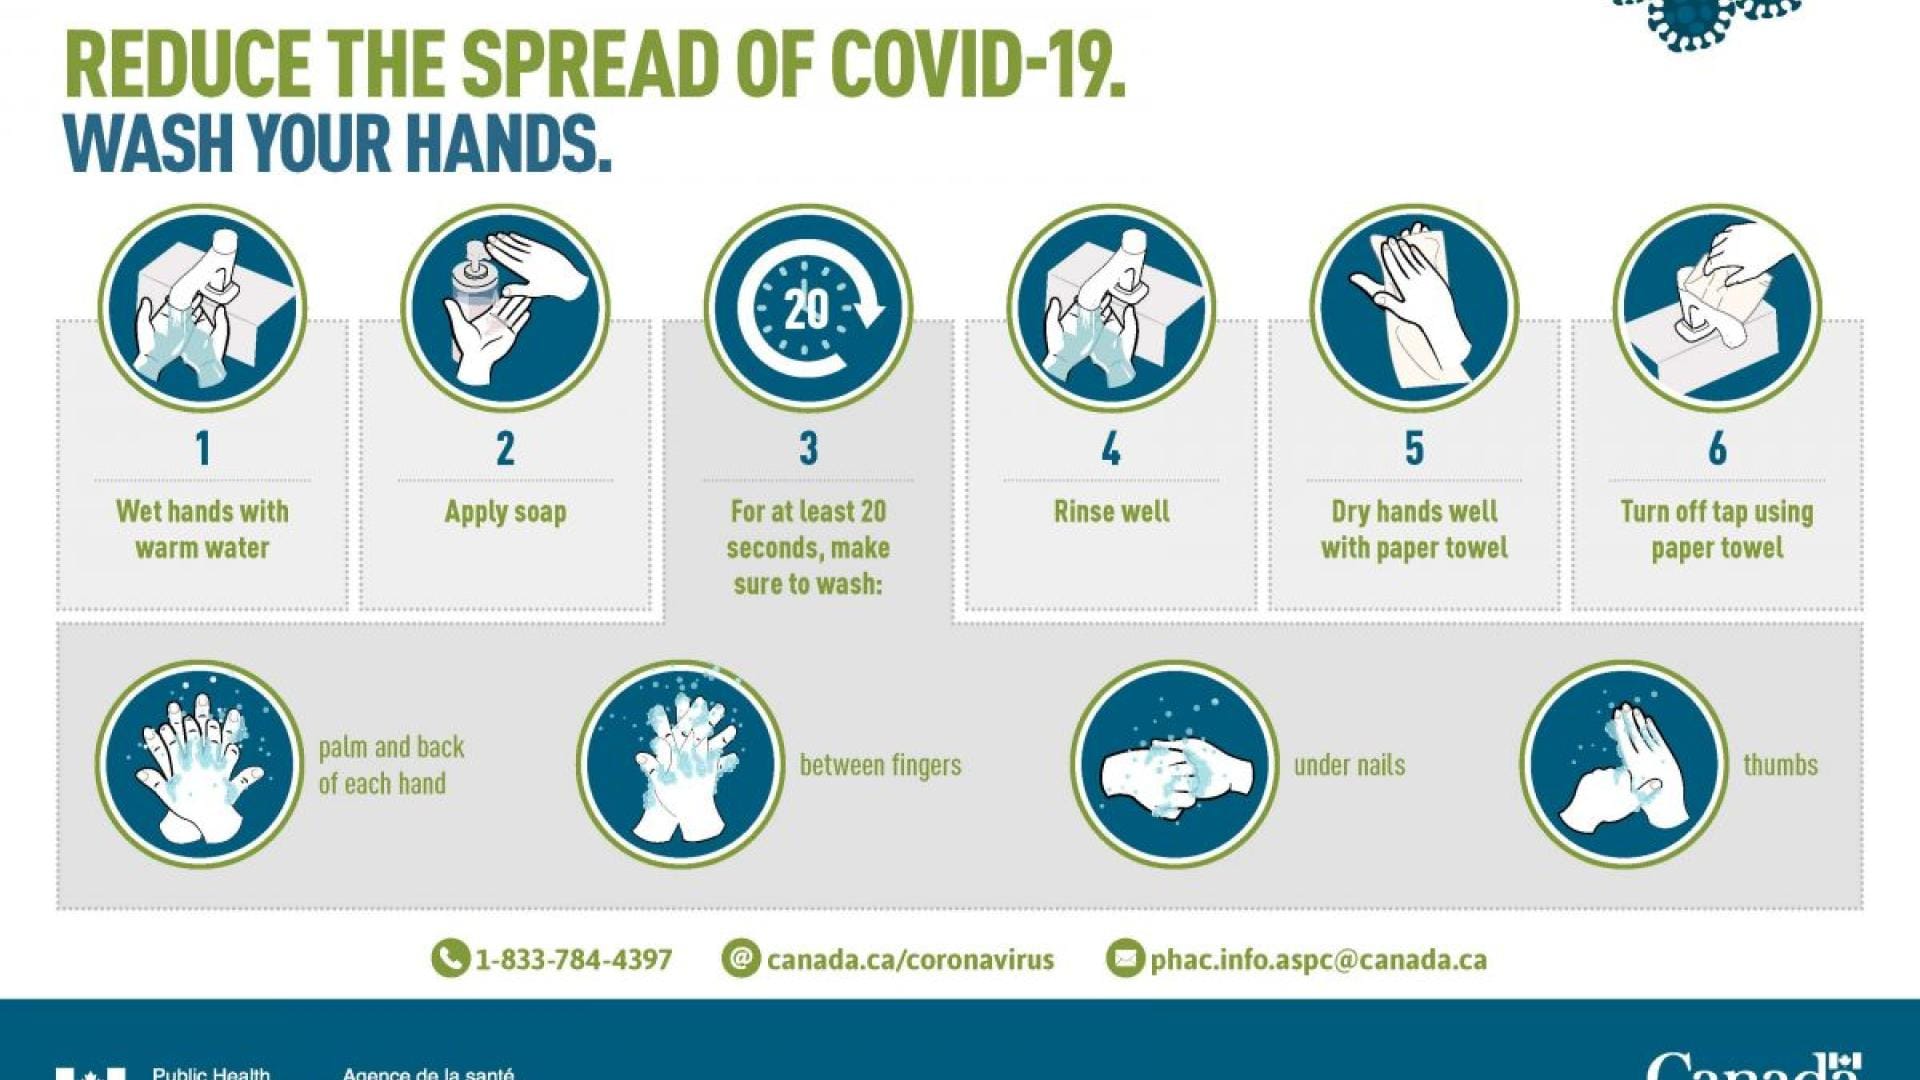 A COVID-19 information sheet summarizing hand washing tips from the Government of Canada